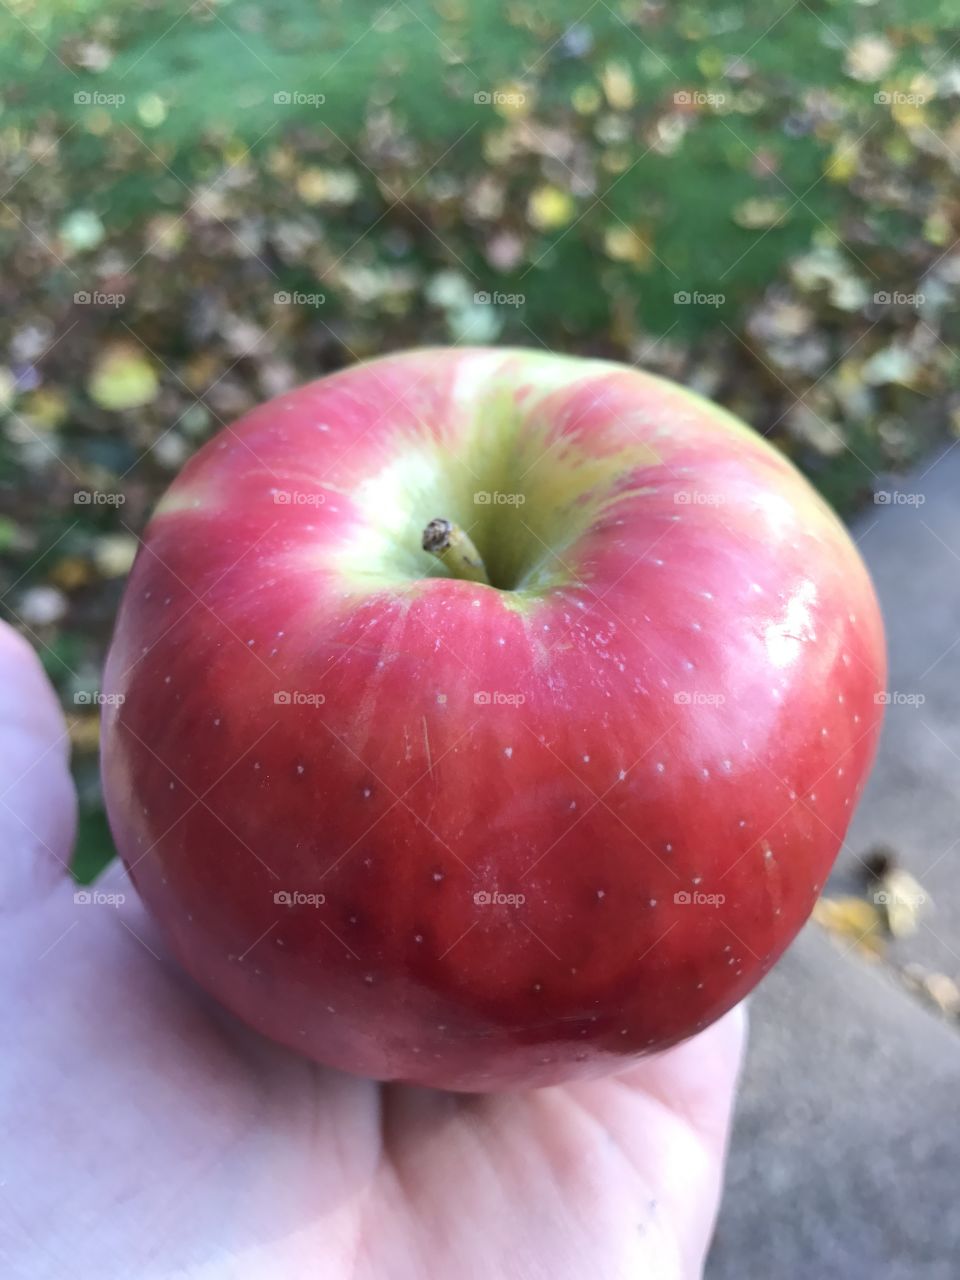 Delicious red apple